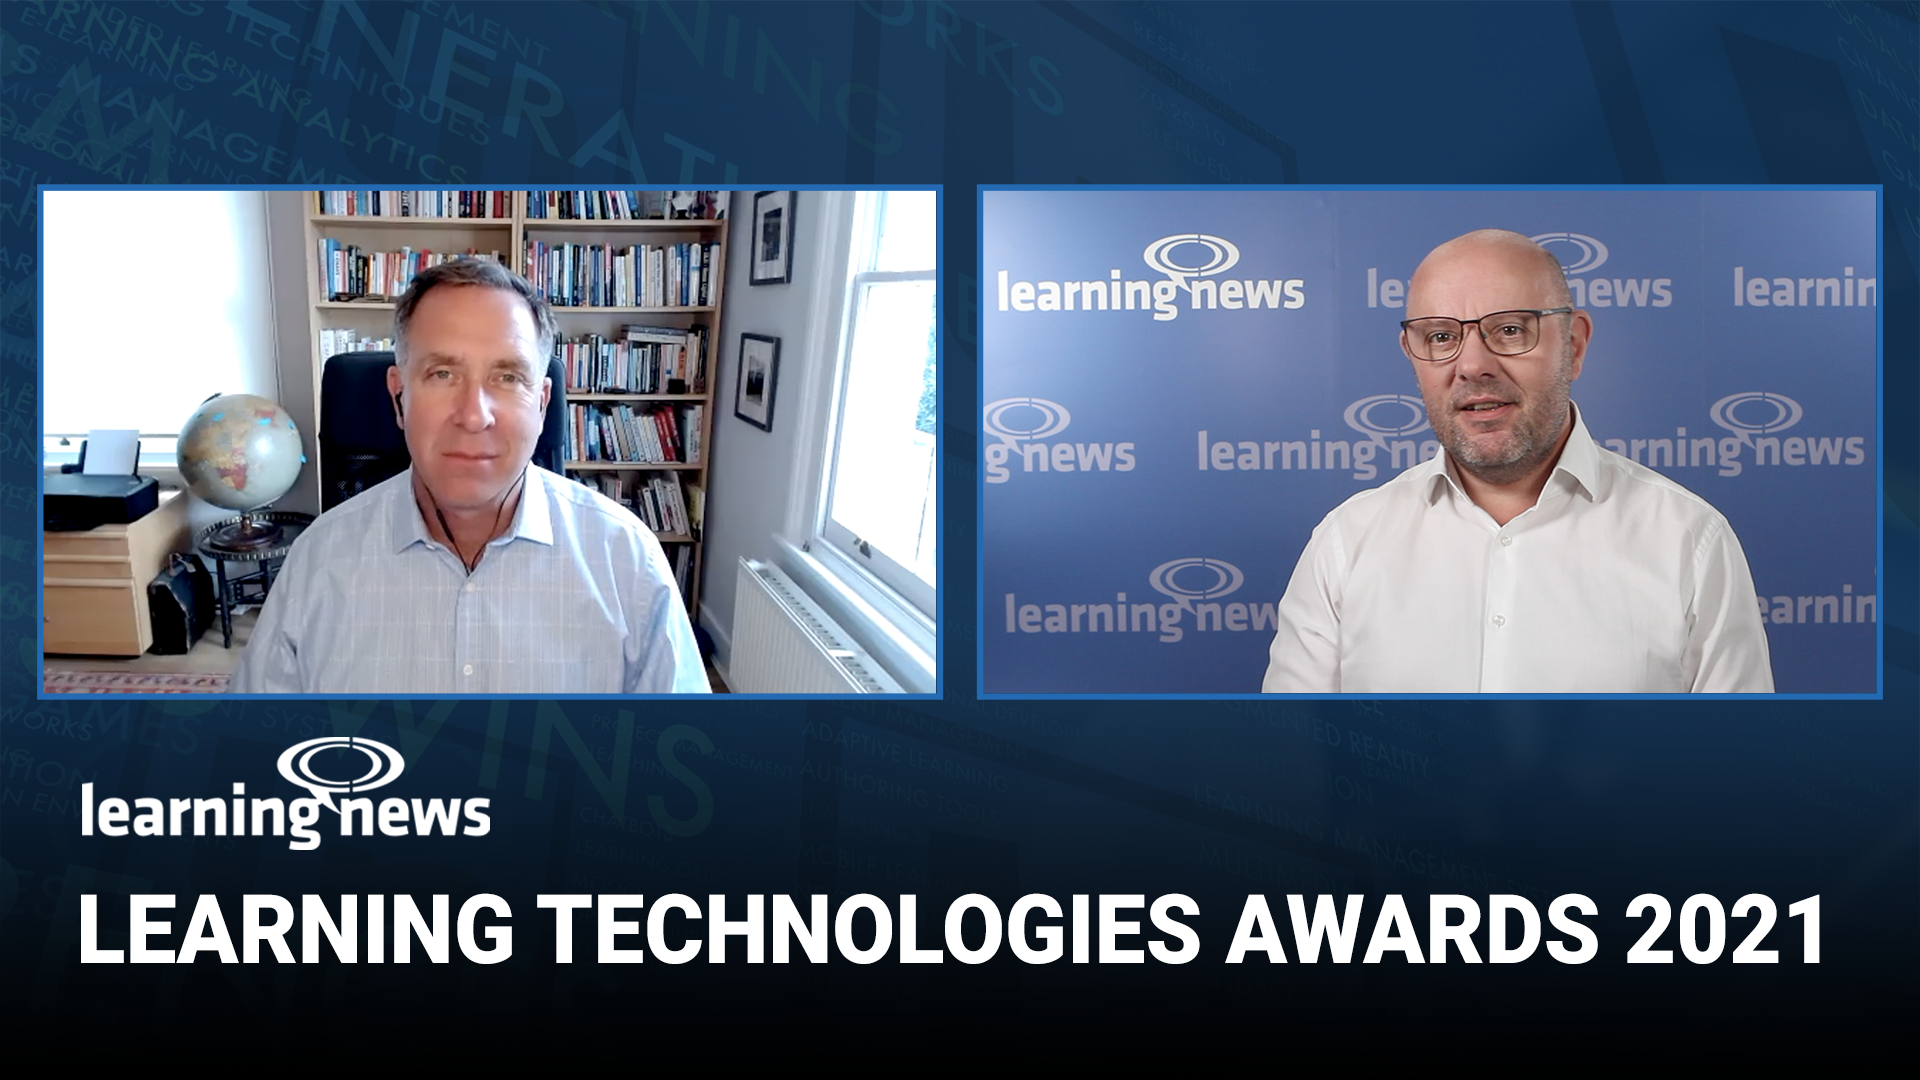 The Learning Technologies Awards return live this Autumn